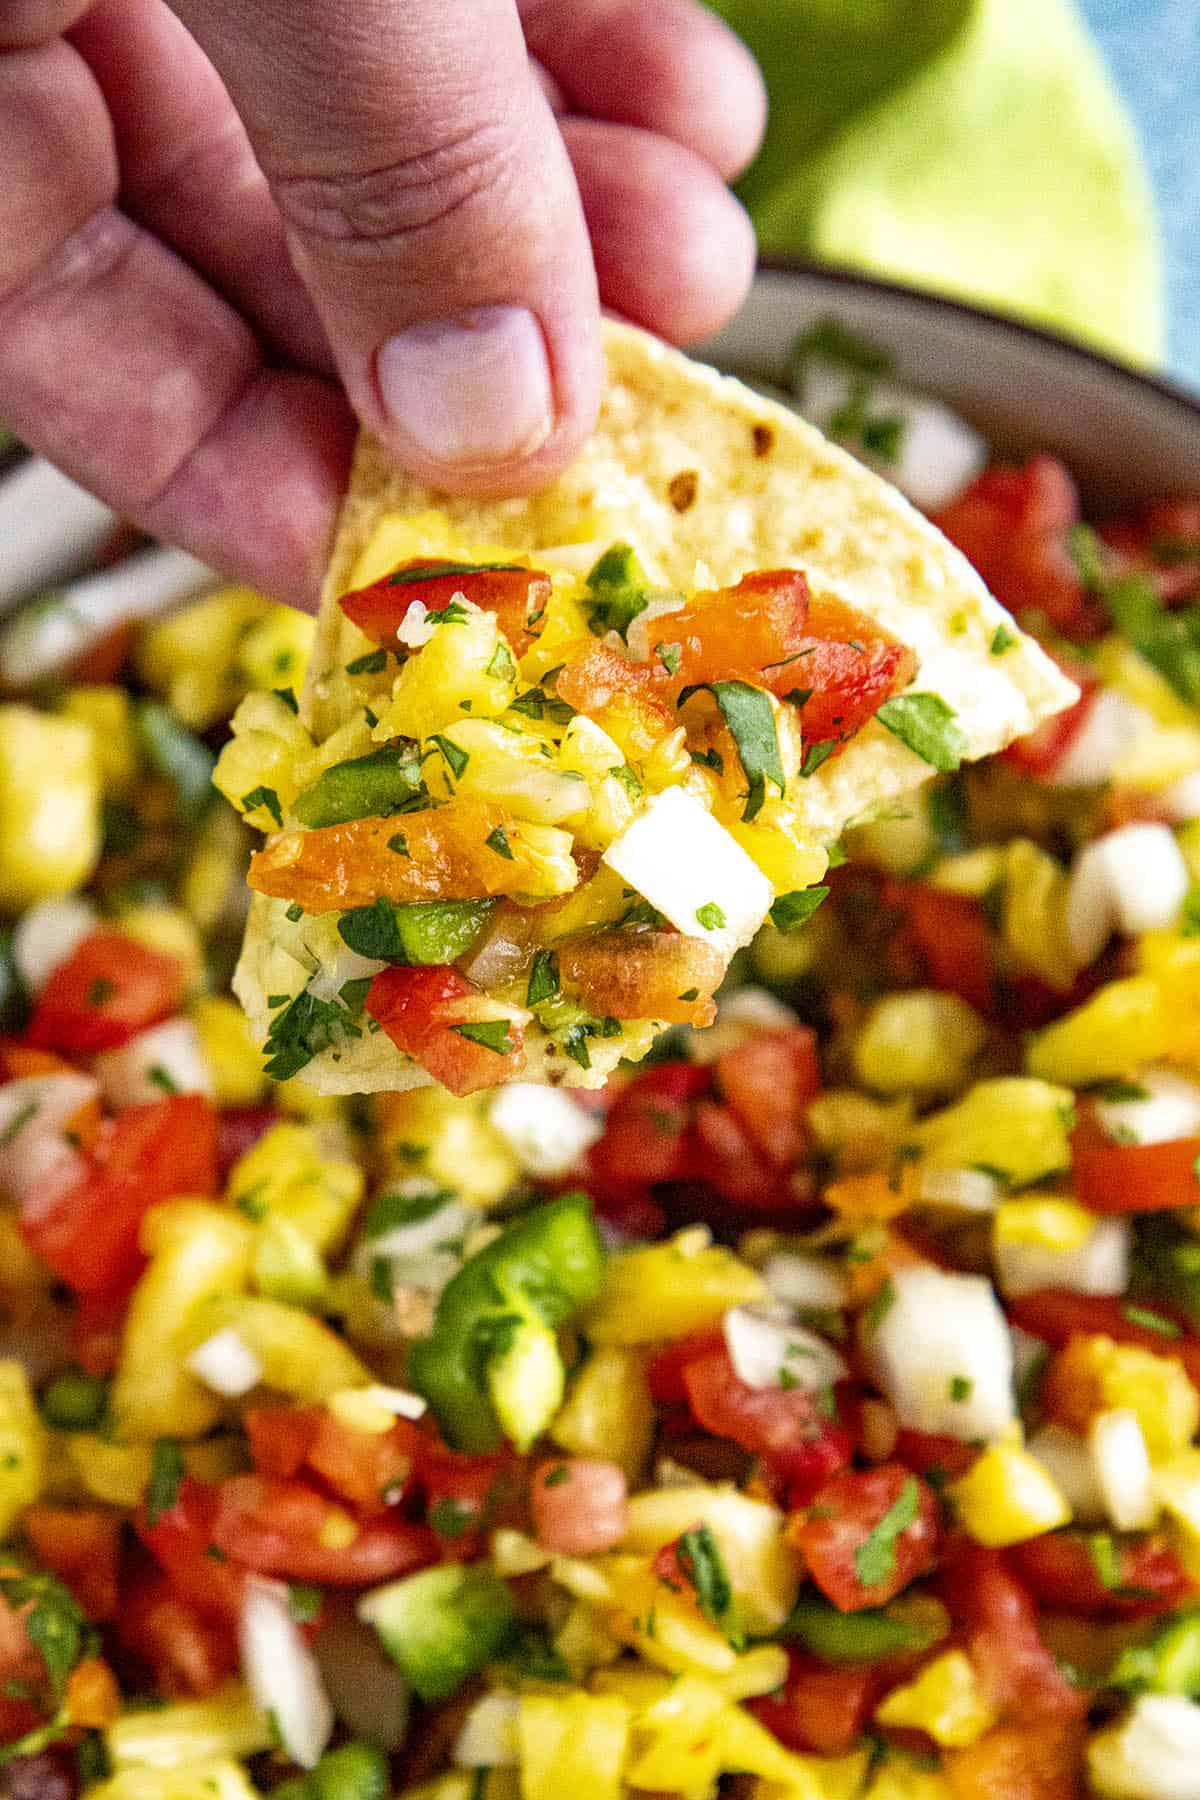 Spicy Pineapple Salsa with habanero peppers on a chip